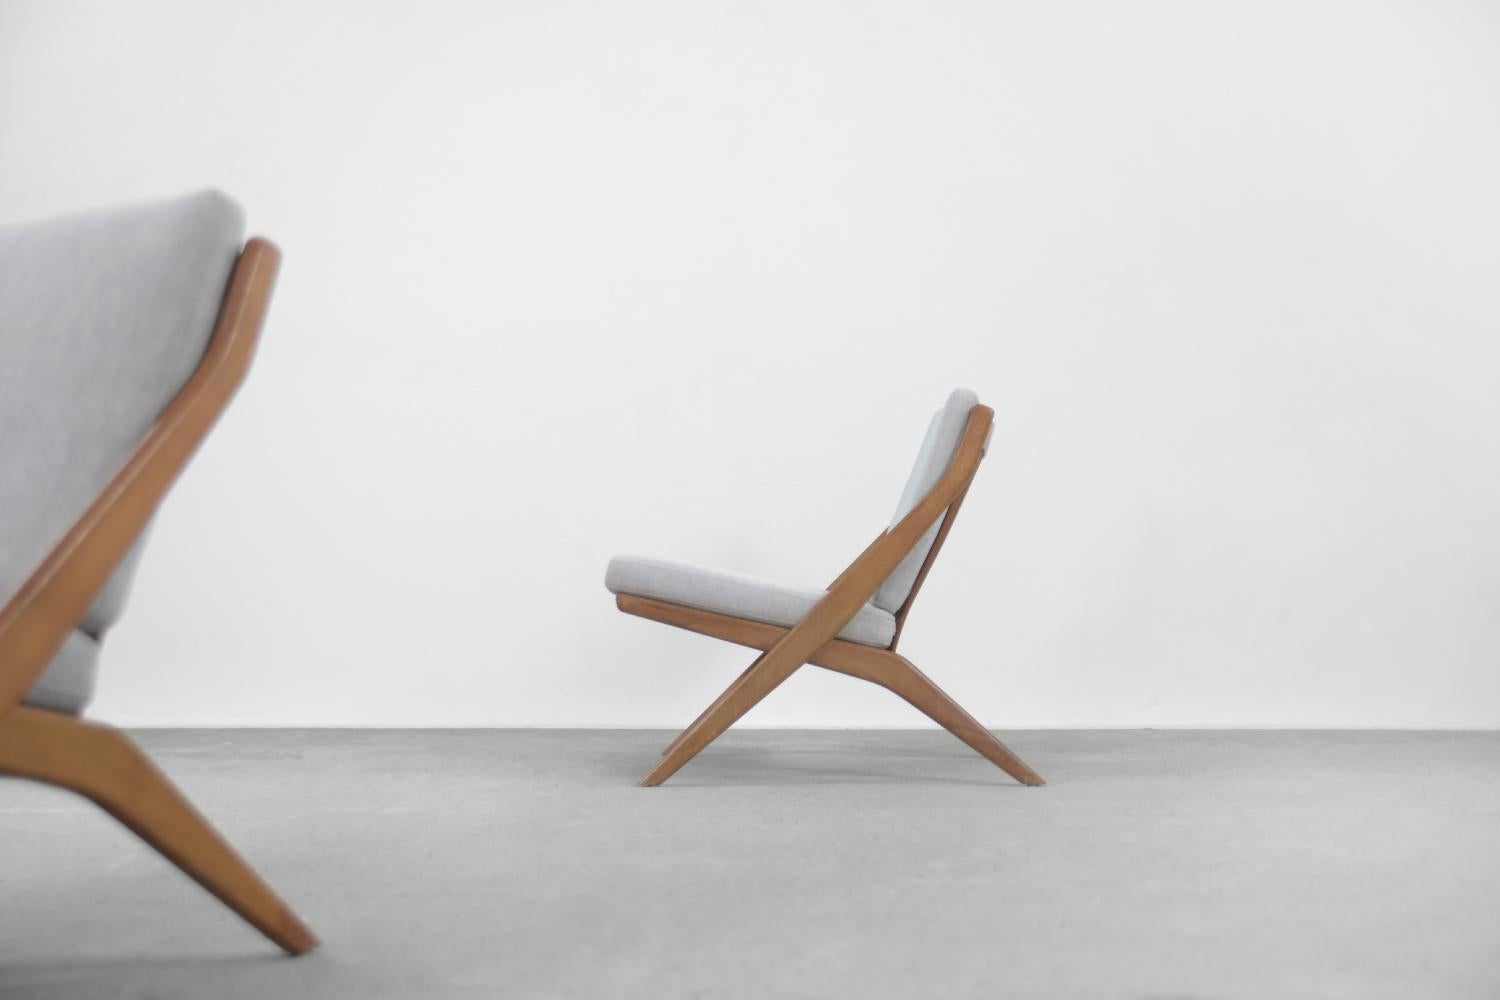 Pair of Mid-Century Modern Swedish Scissor Chairs by Folke Ohlsson for Bodafors For Sale 4